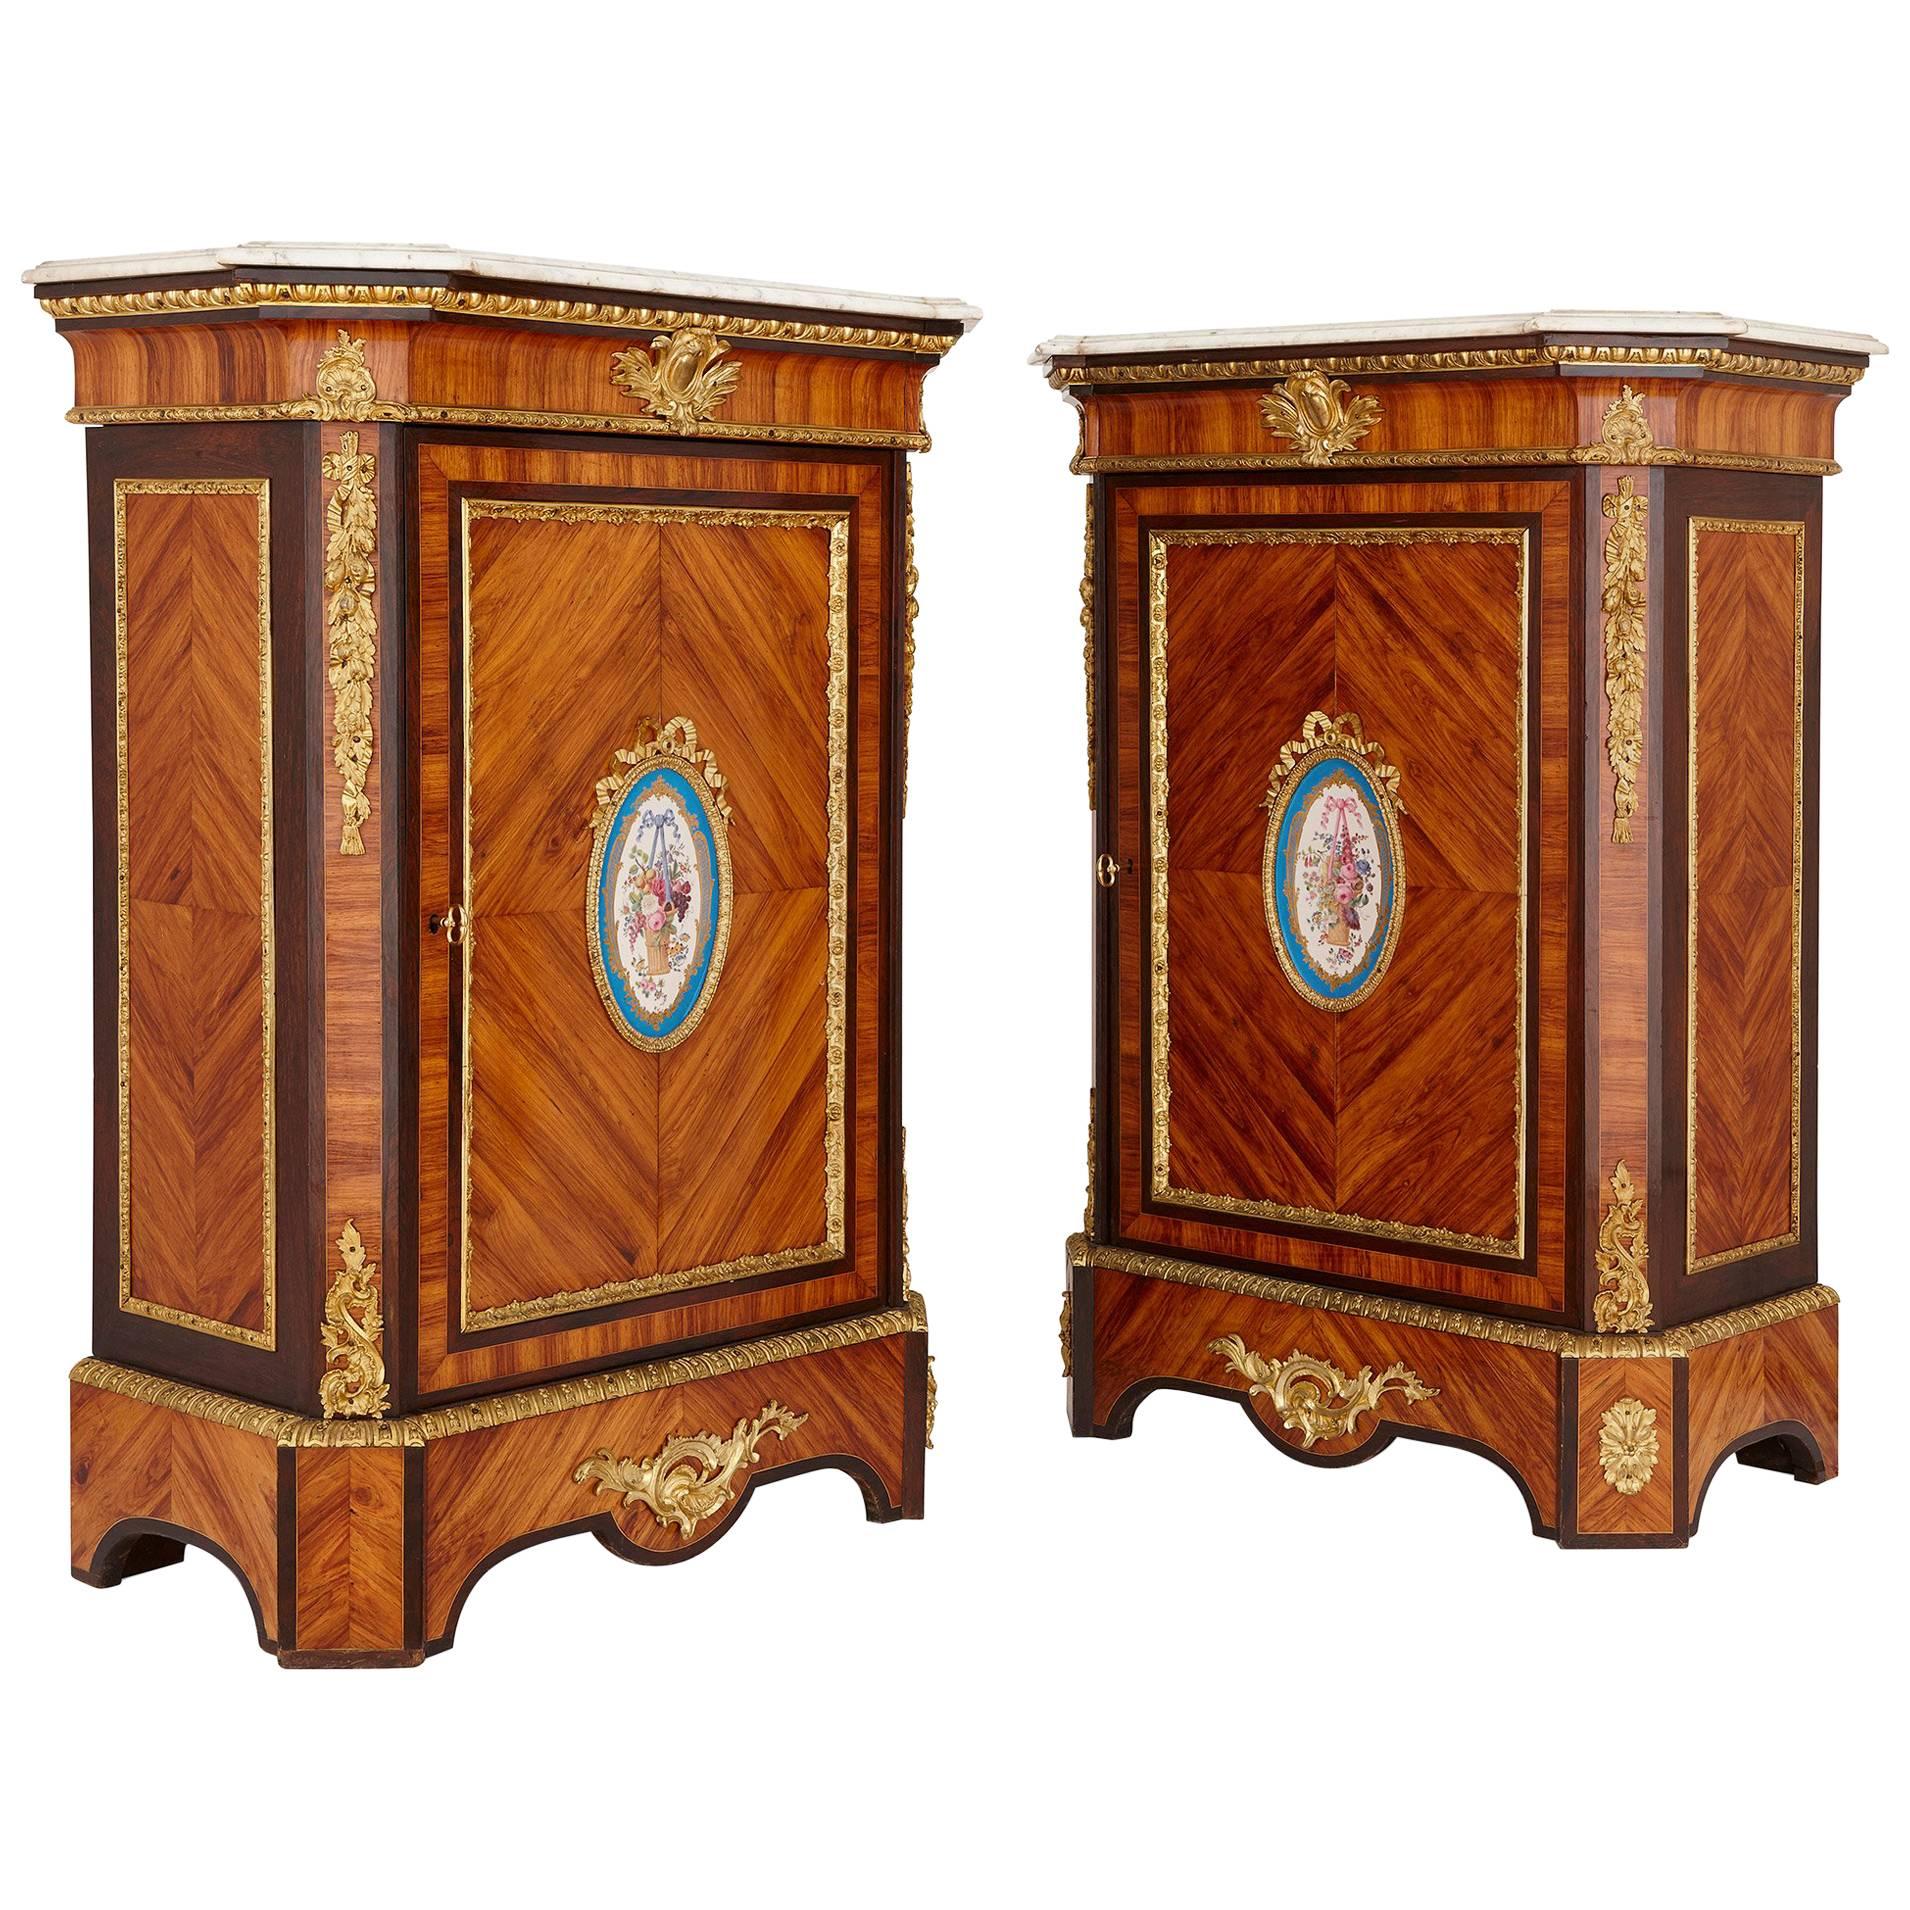 Pair of Antique French Wooden Cabinets with Sèvres Style Porcelain Plaques